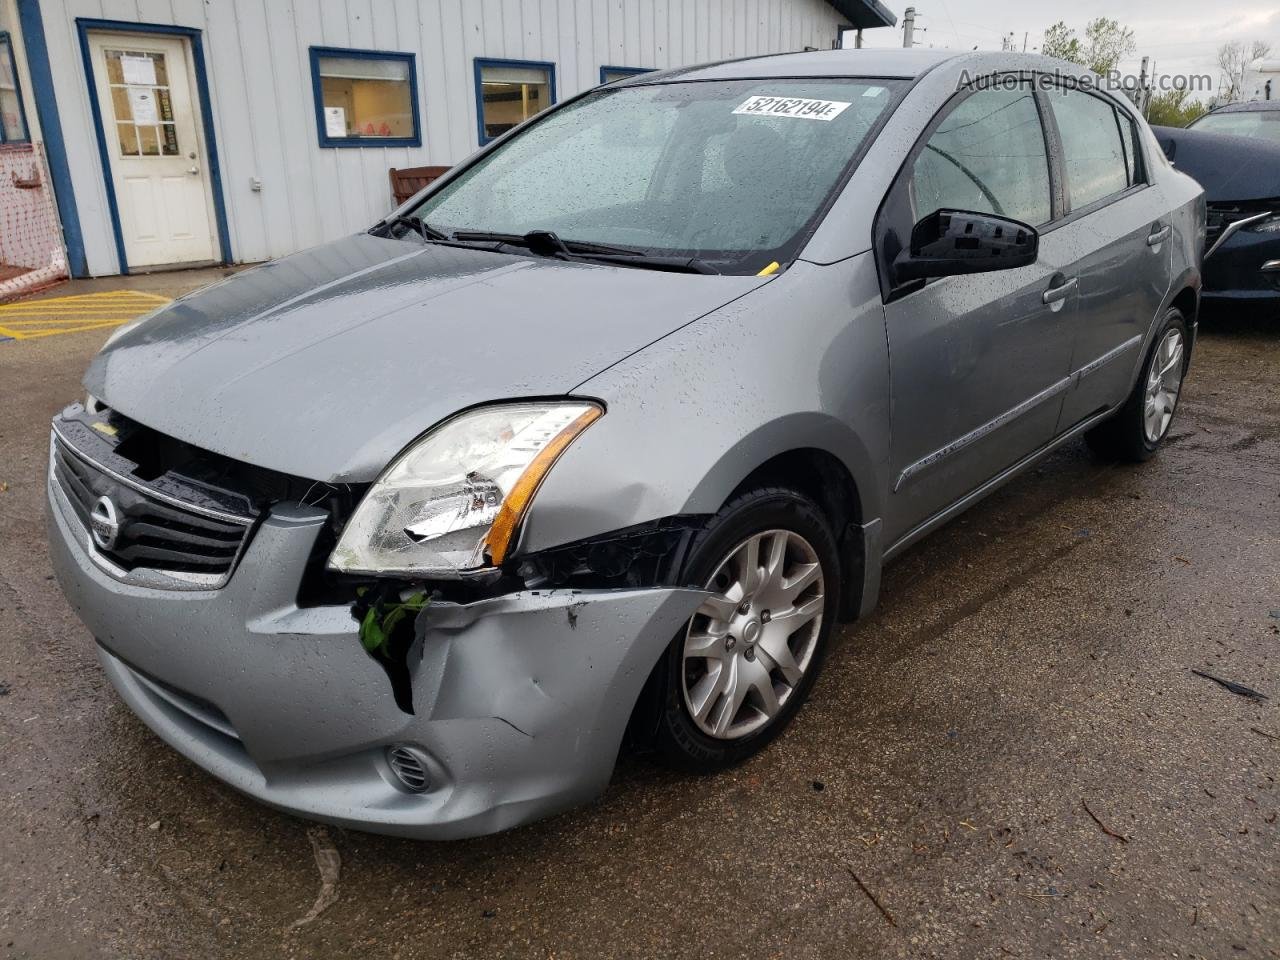 2012 Nissan Sentra 2.0 Gray vin: 3N1AB6APXCL769080